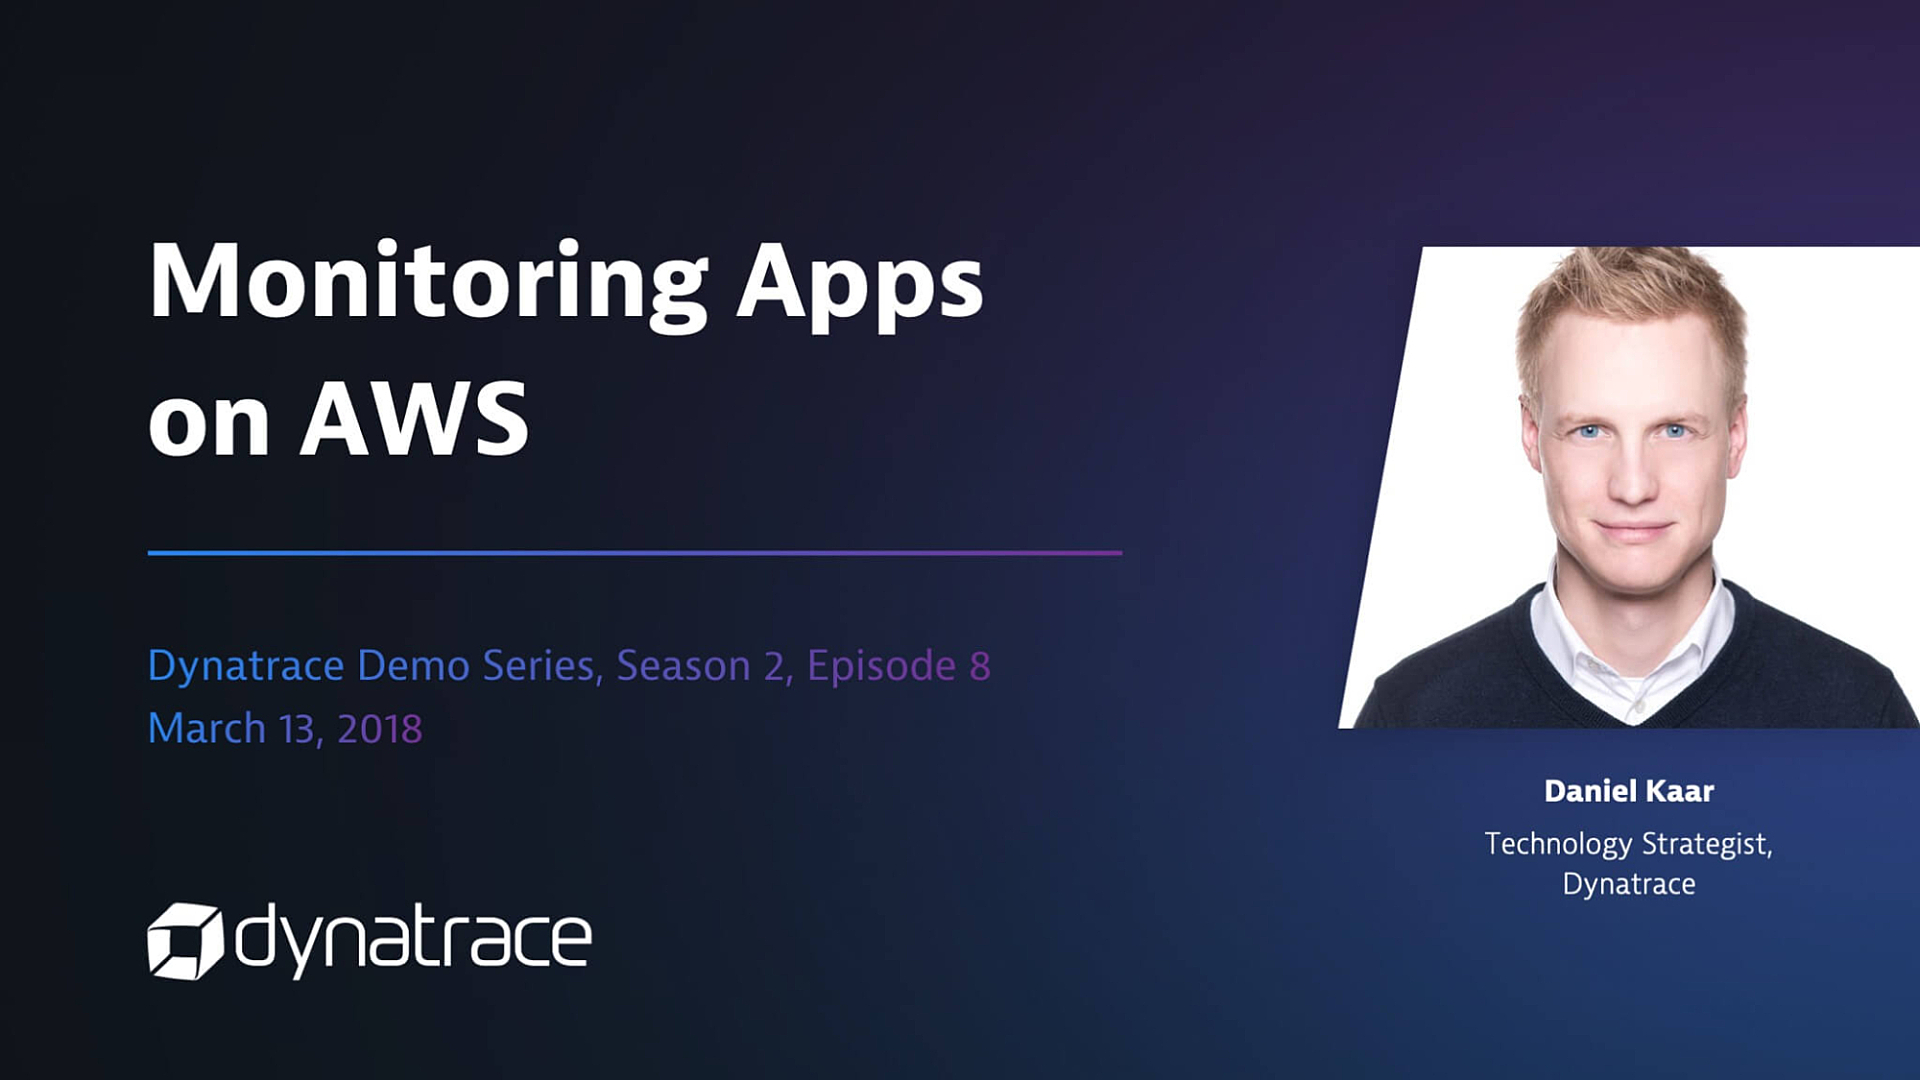 Monitoring apps on AWS with Dynatrace webinar